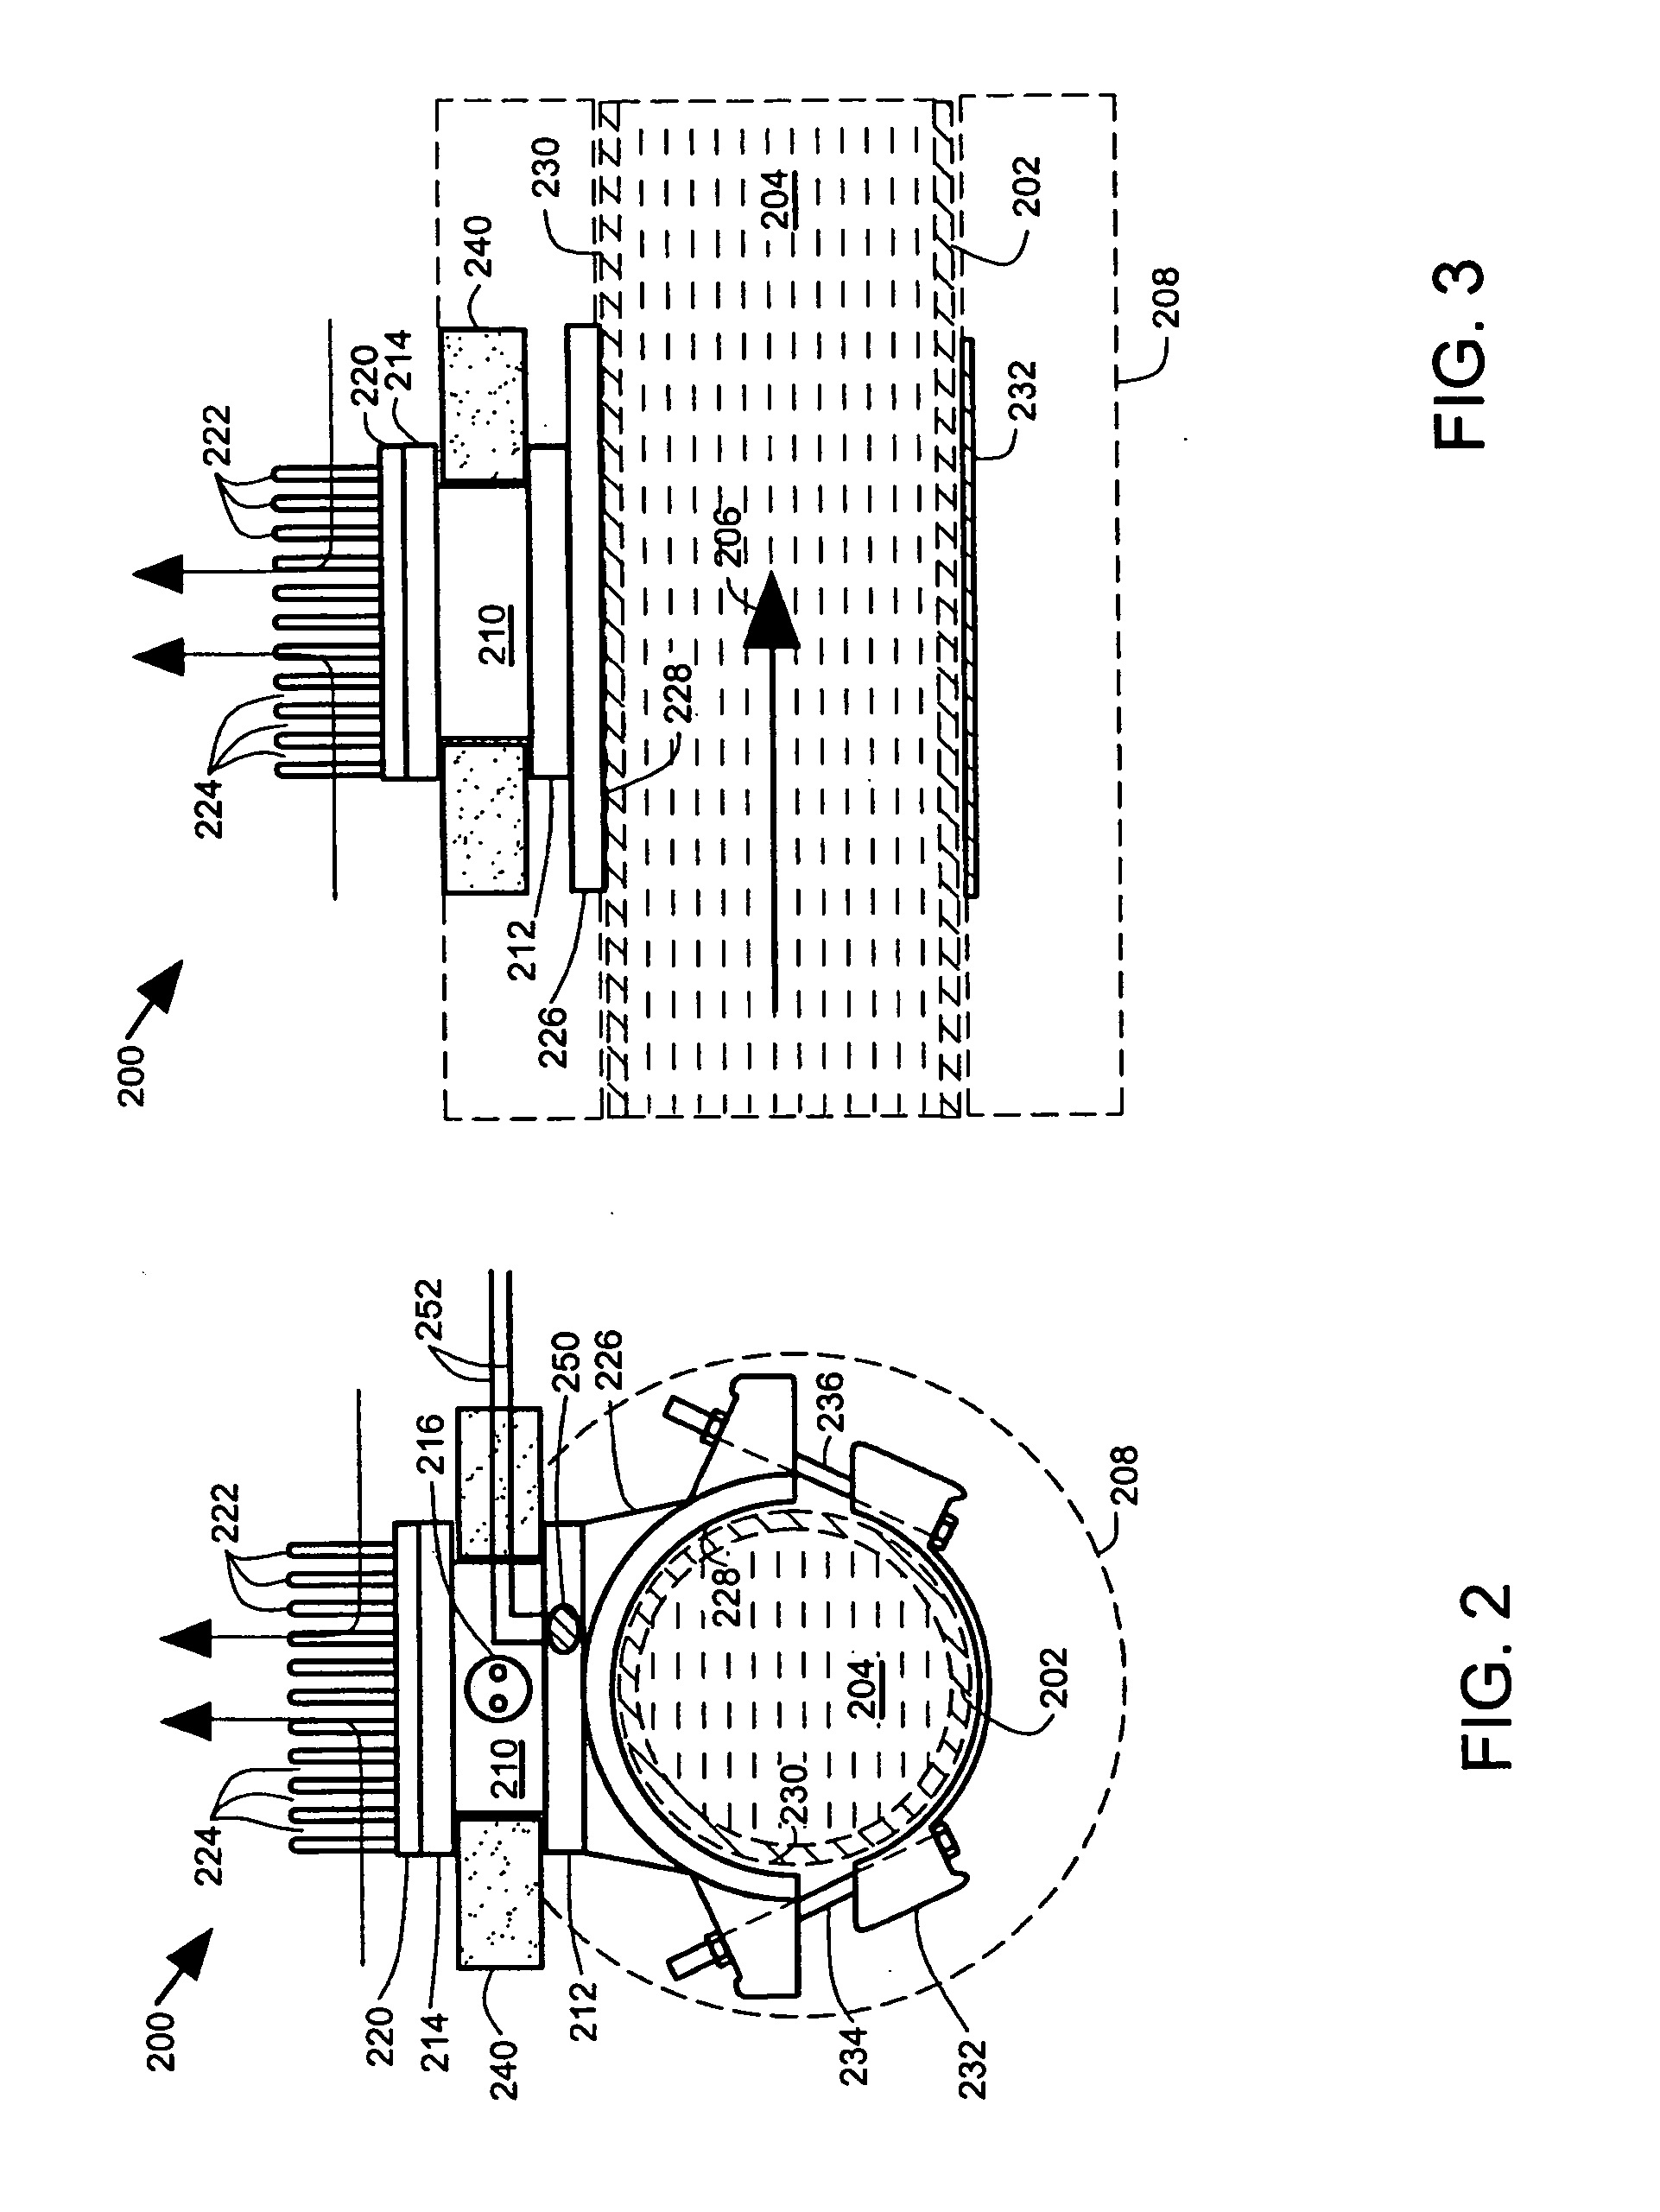 Pipeline thermoelectric generator assembly